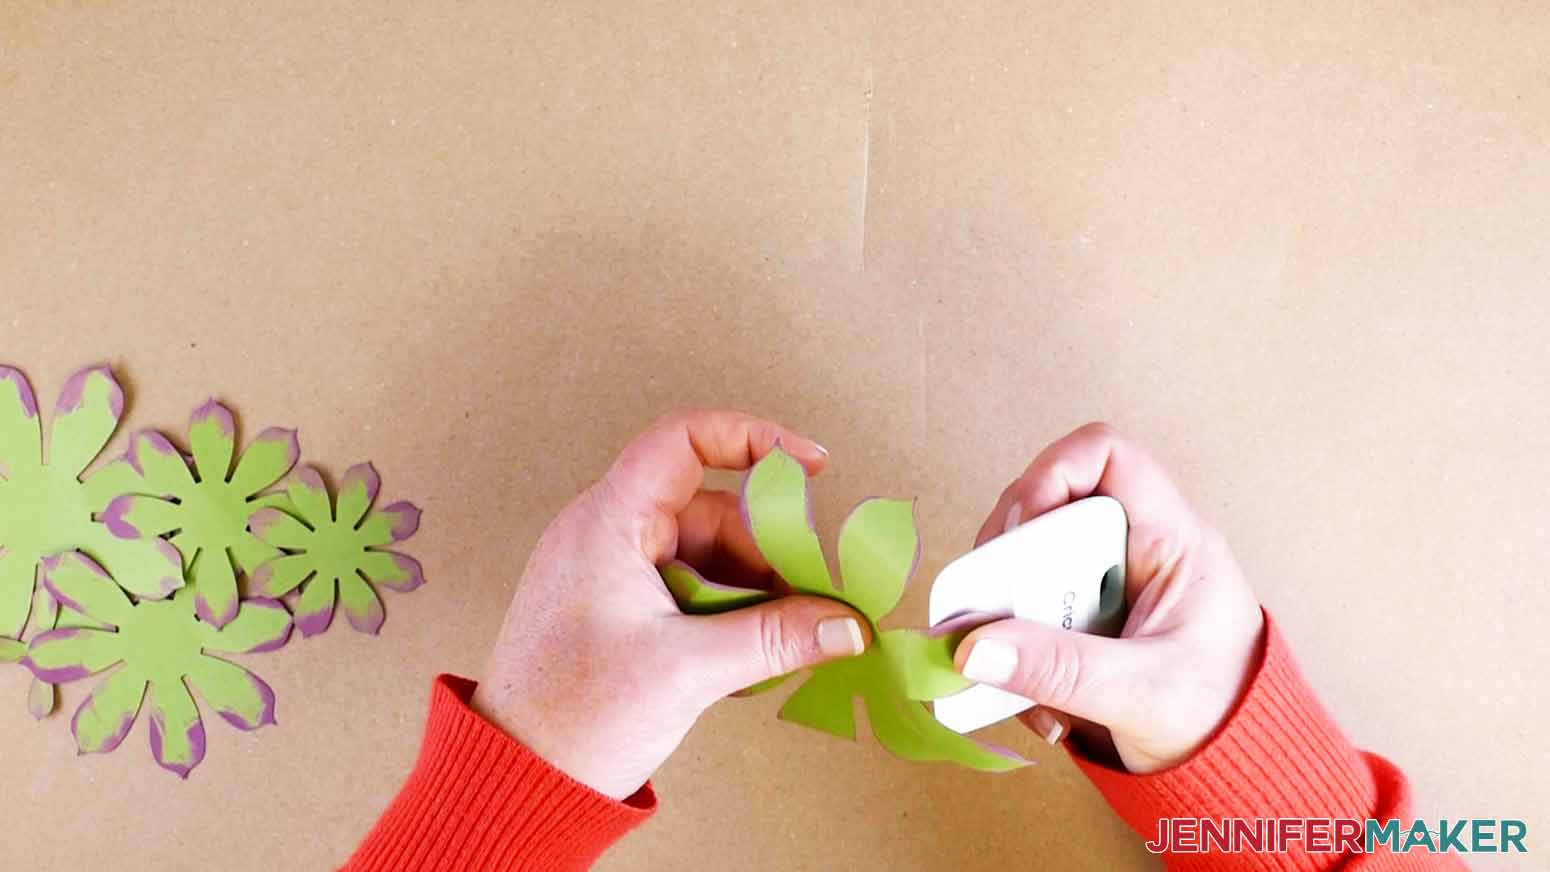 Use a scraper tool to form the succulent leaves for my paper succulent project